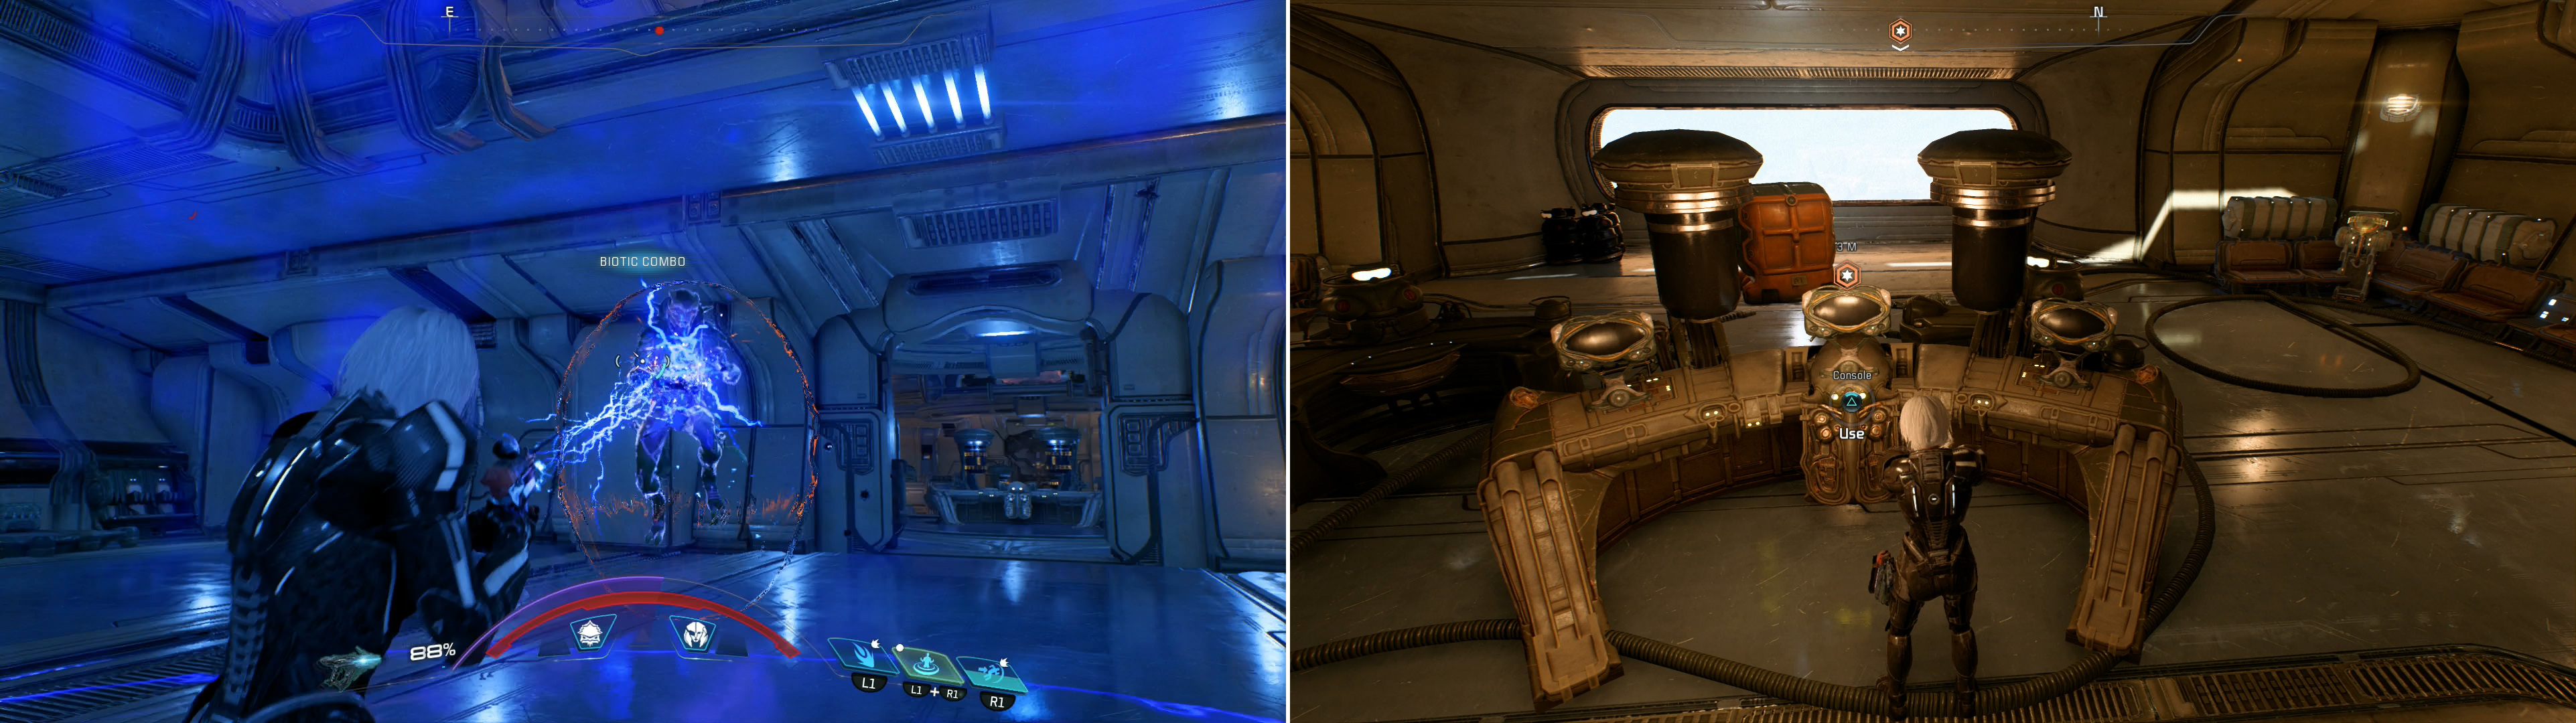 Descend to the core of the Kett base and defeat the Invictor (left) then shut the base down to end the Kett menance on Eos for good (right).